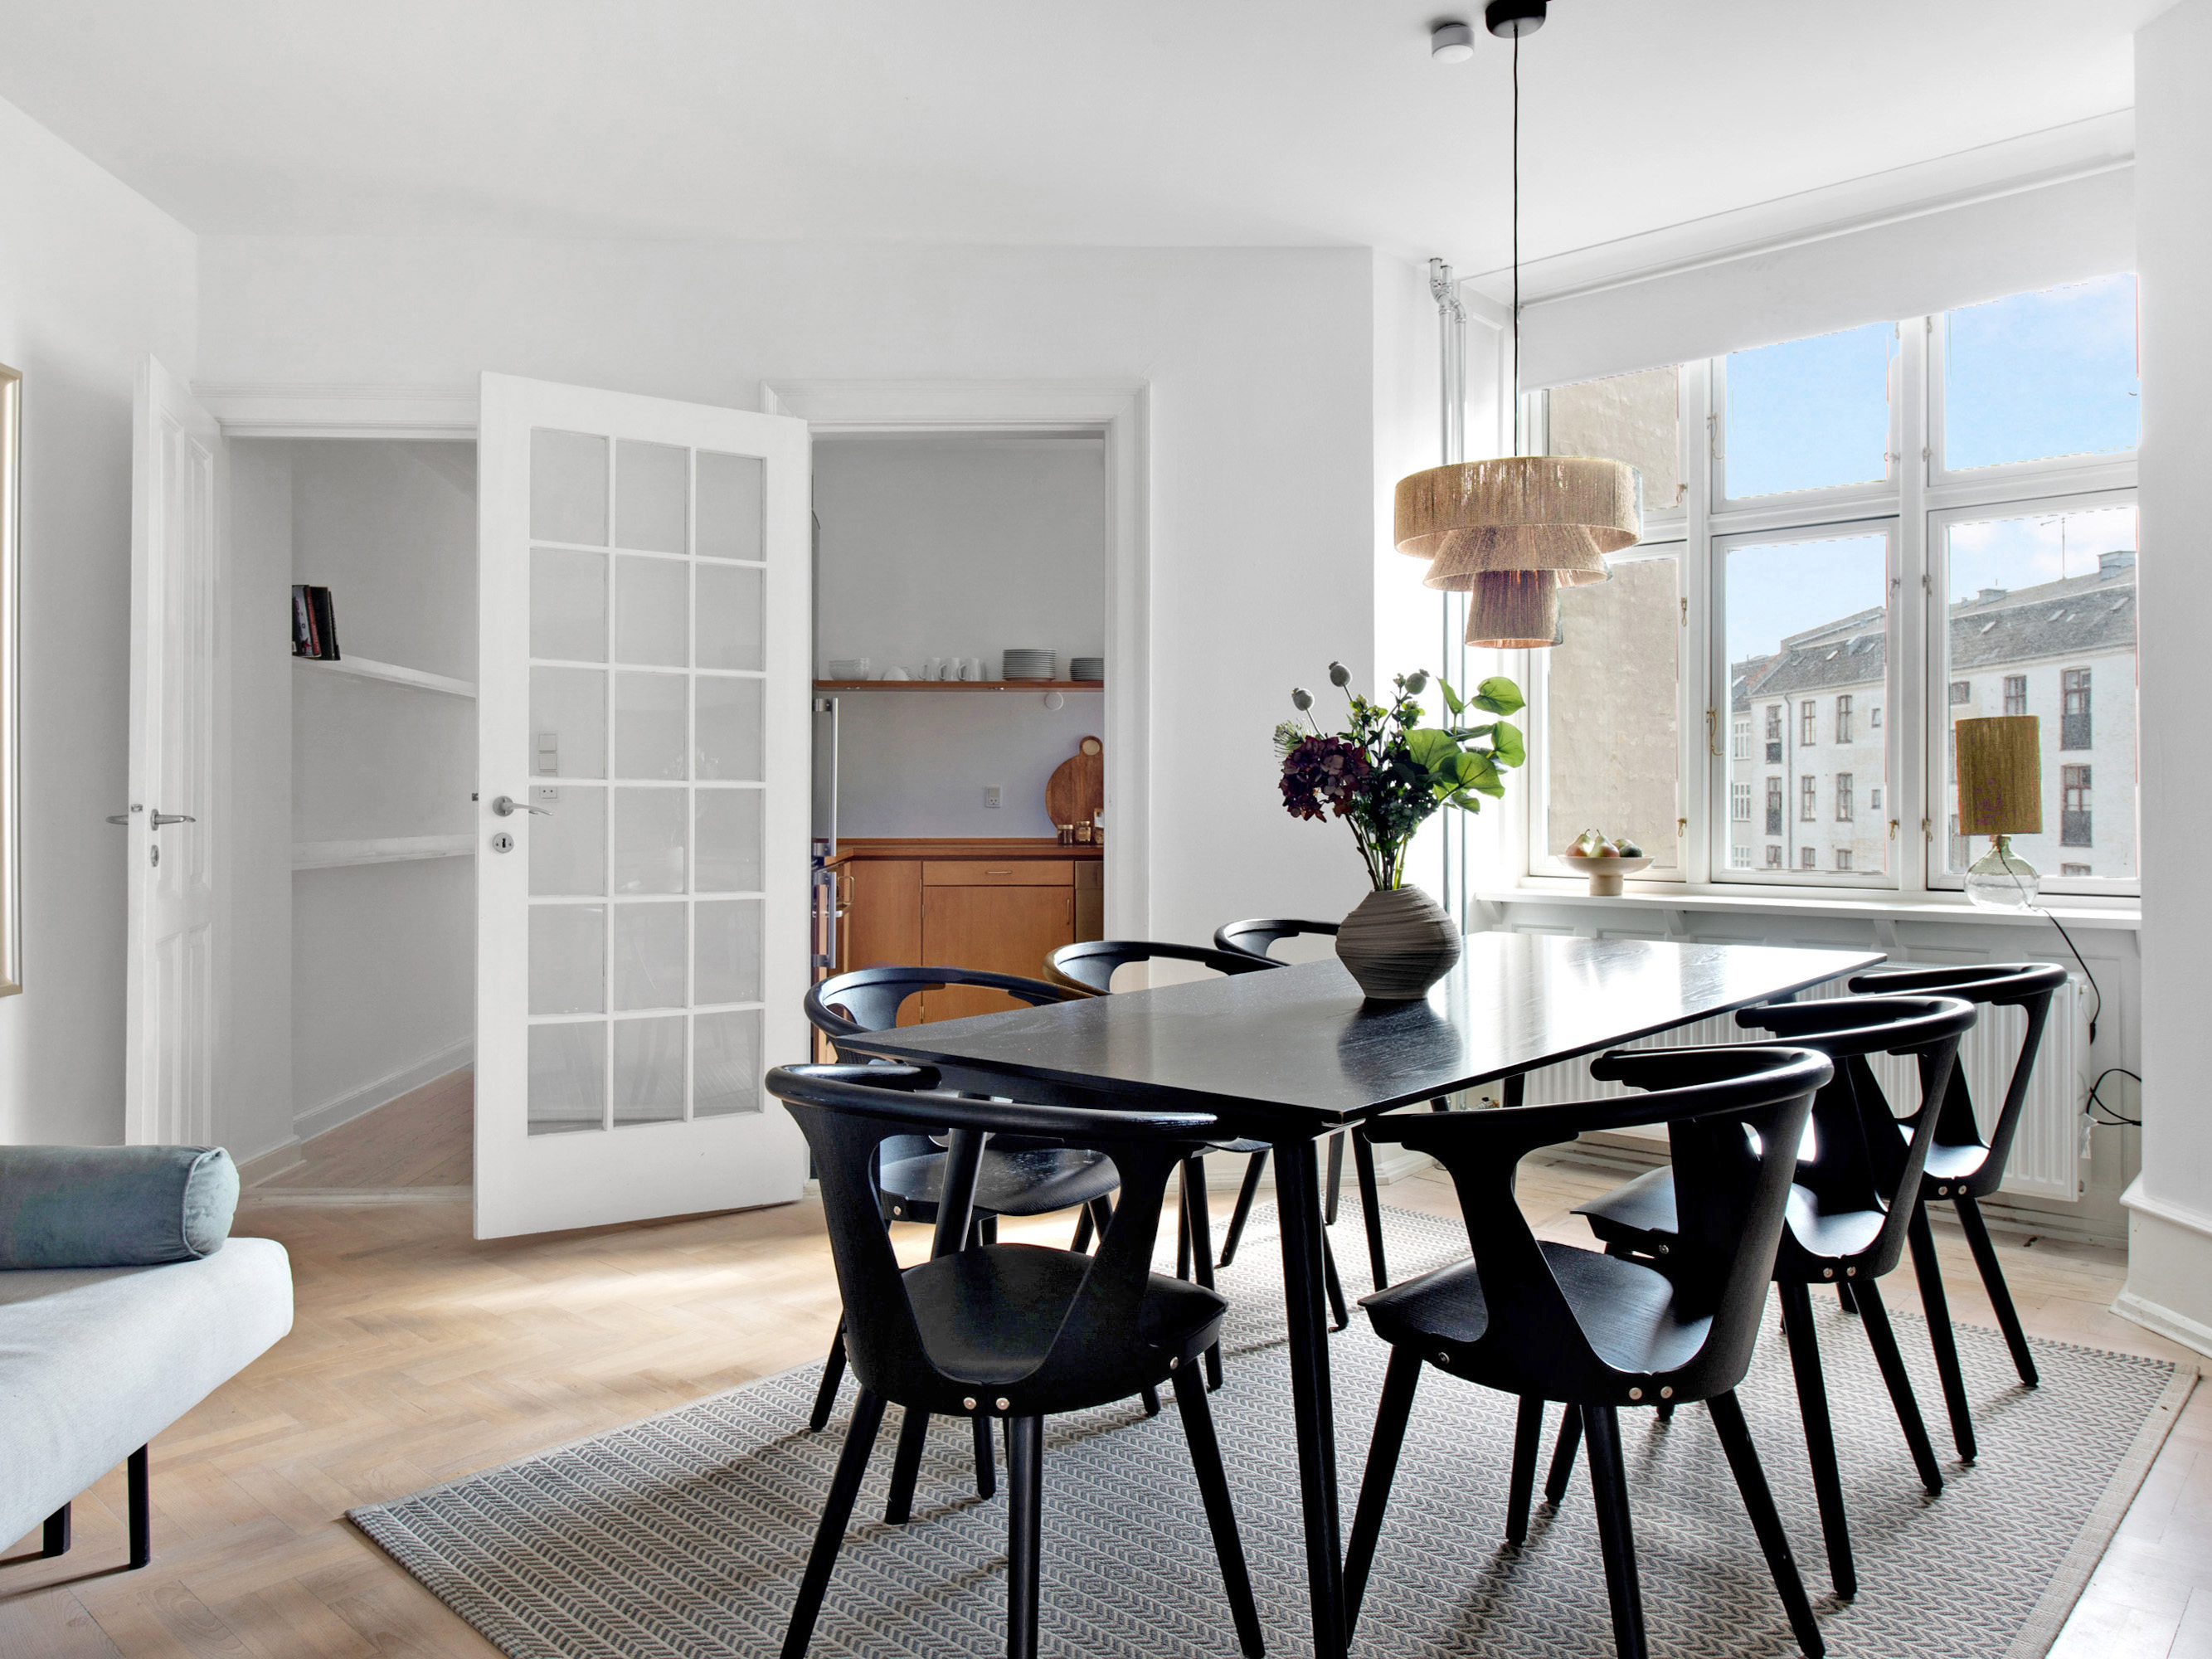 Stunning three-bedroom apartment just next to gorgeous Nyhavn. All yours. |  3-bed apartment for rent #11976312 | Rentberry